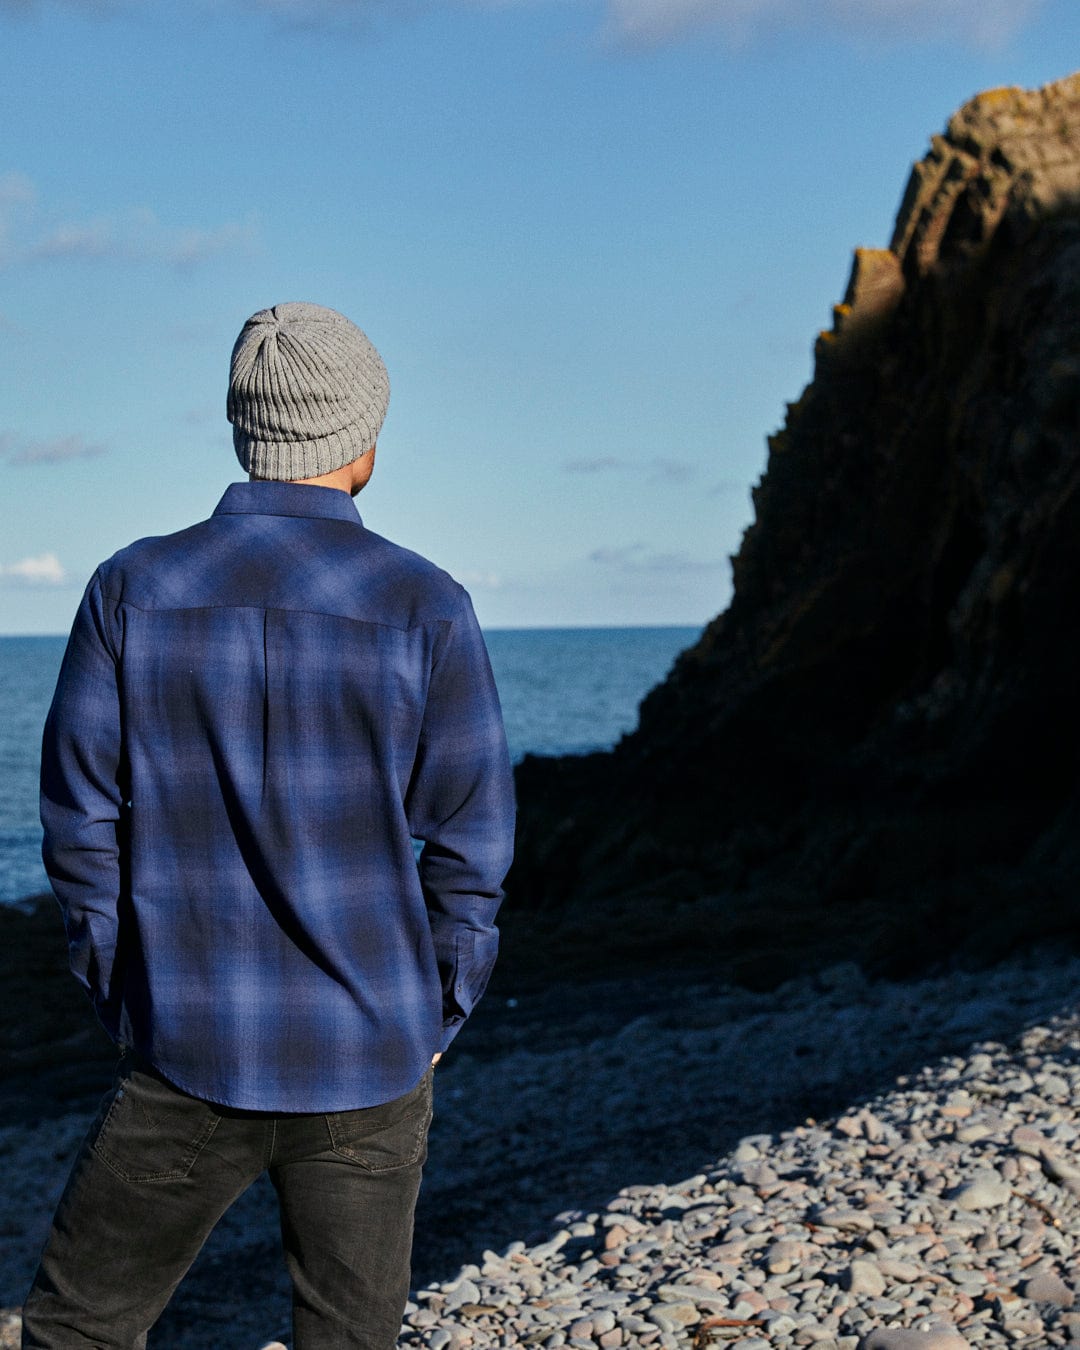 A man standing on a rocky beach, wearing Saltrock's Farris - Mens Check Shirt - Blue made of 100% cotton, gazing out at the vast ocean spread before him under the clear blue sky.